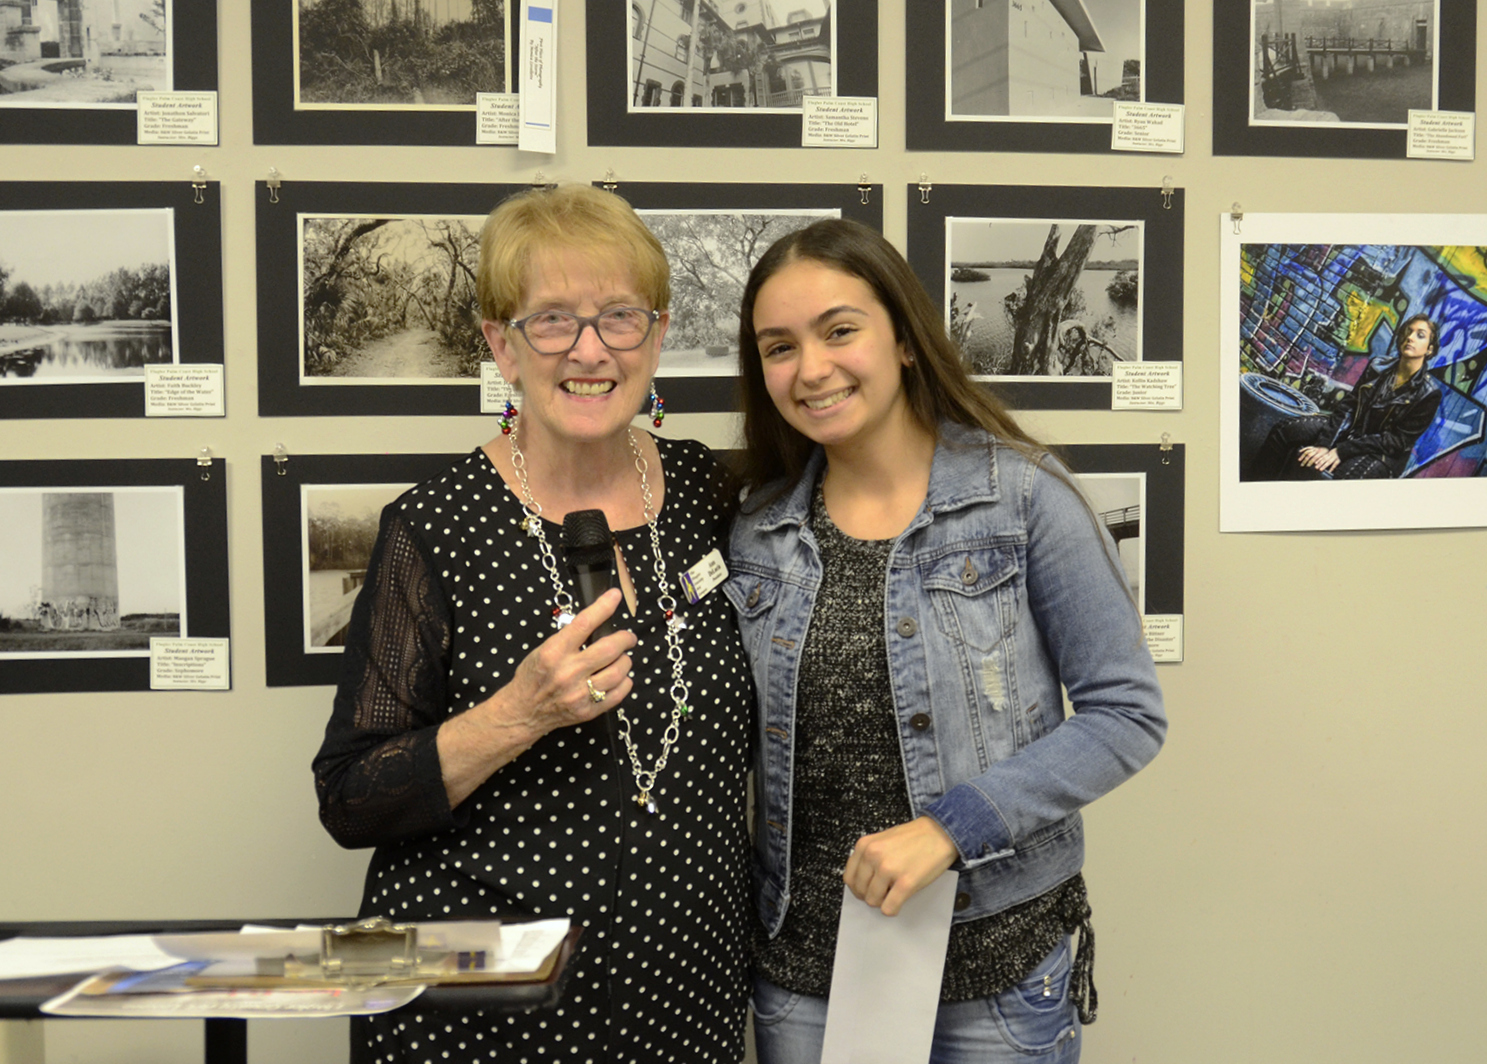 Ann DeLucia, president of FCAL, and Matanzas High School student Annalisa Pereira, who won Best in Show with a sculpture: 